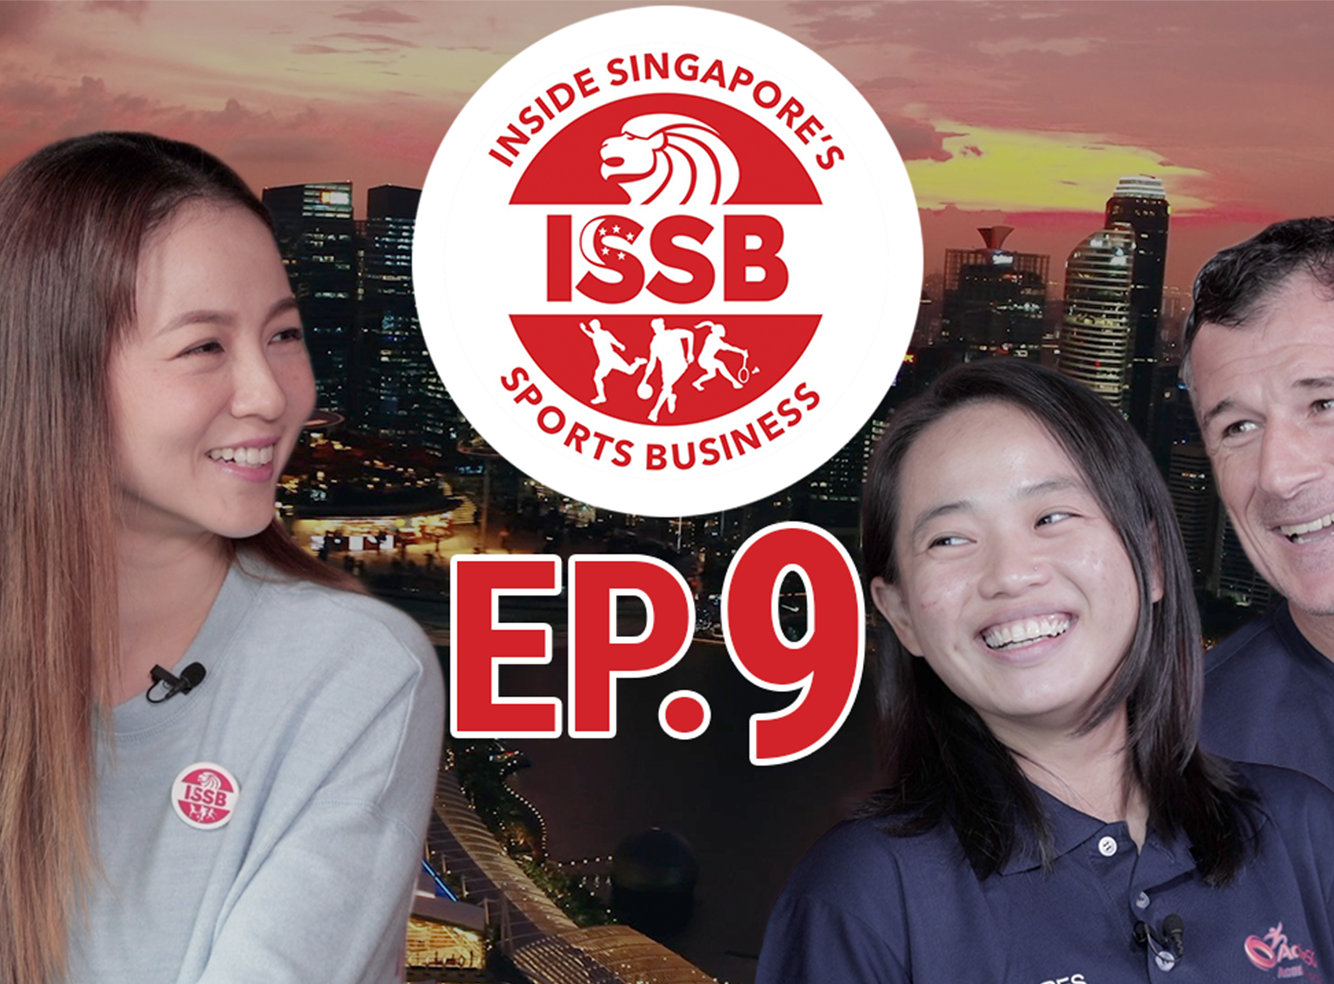 Ep 9 - The Future of the Football Industry in Singapore